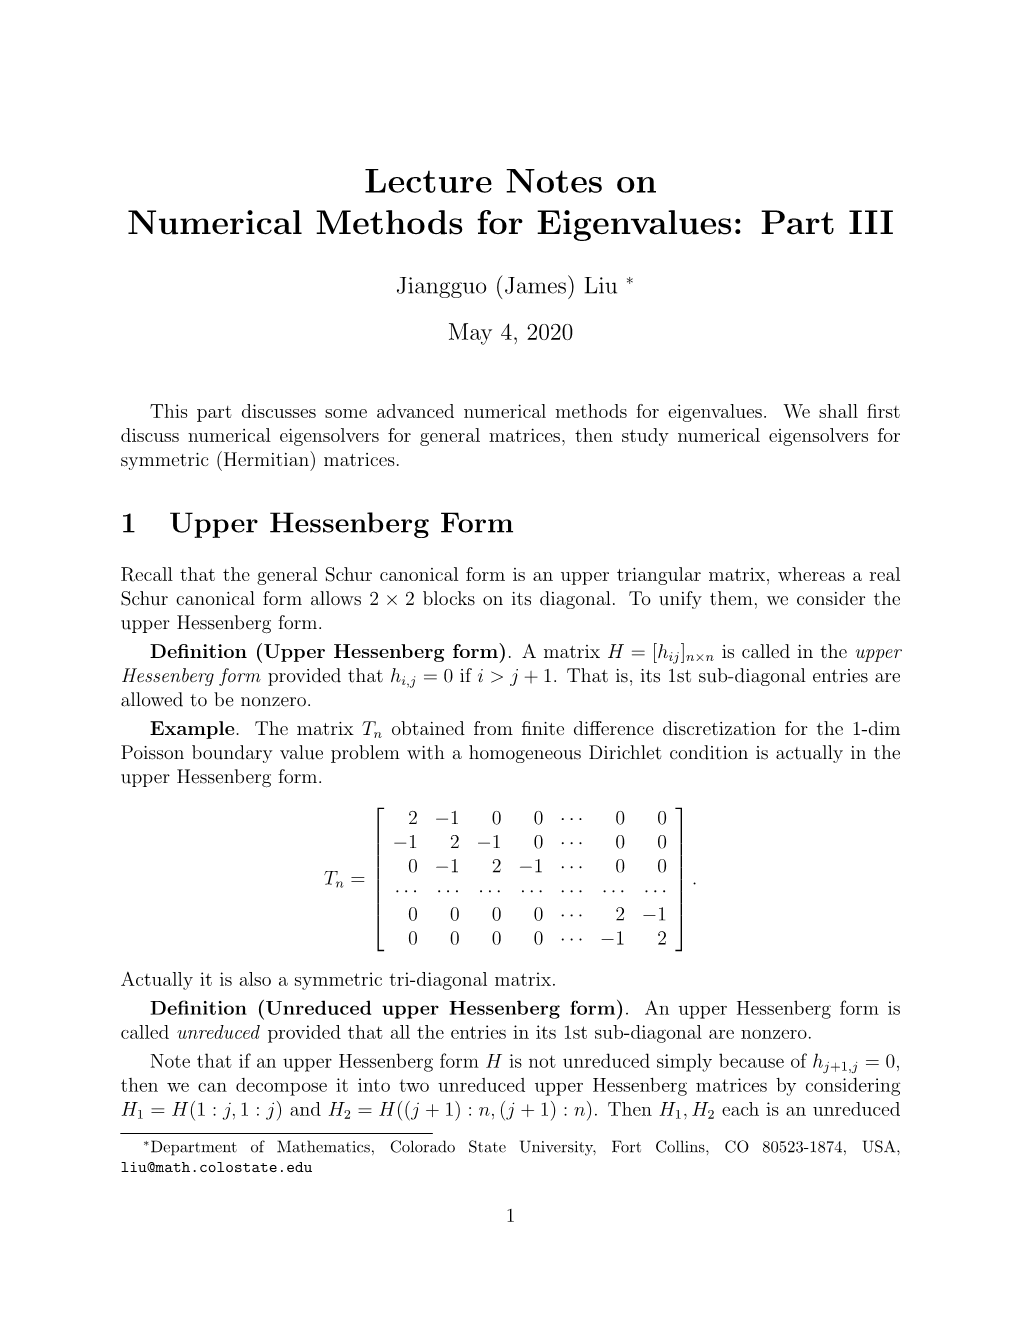 Lecture Notes on Numerical Methods for Eigenvalues: Part III